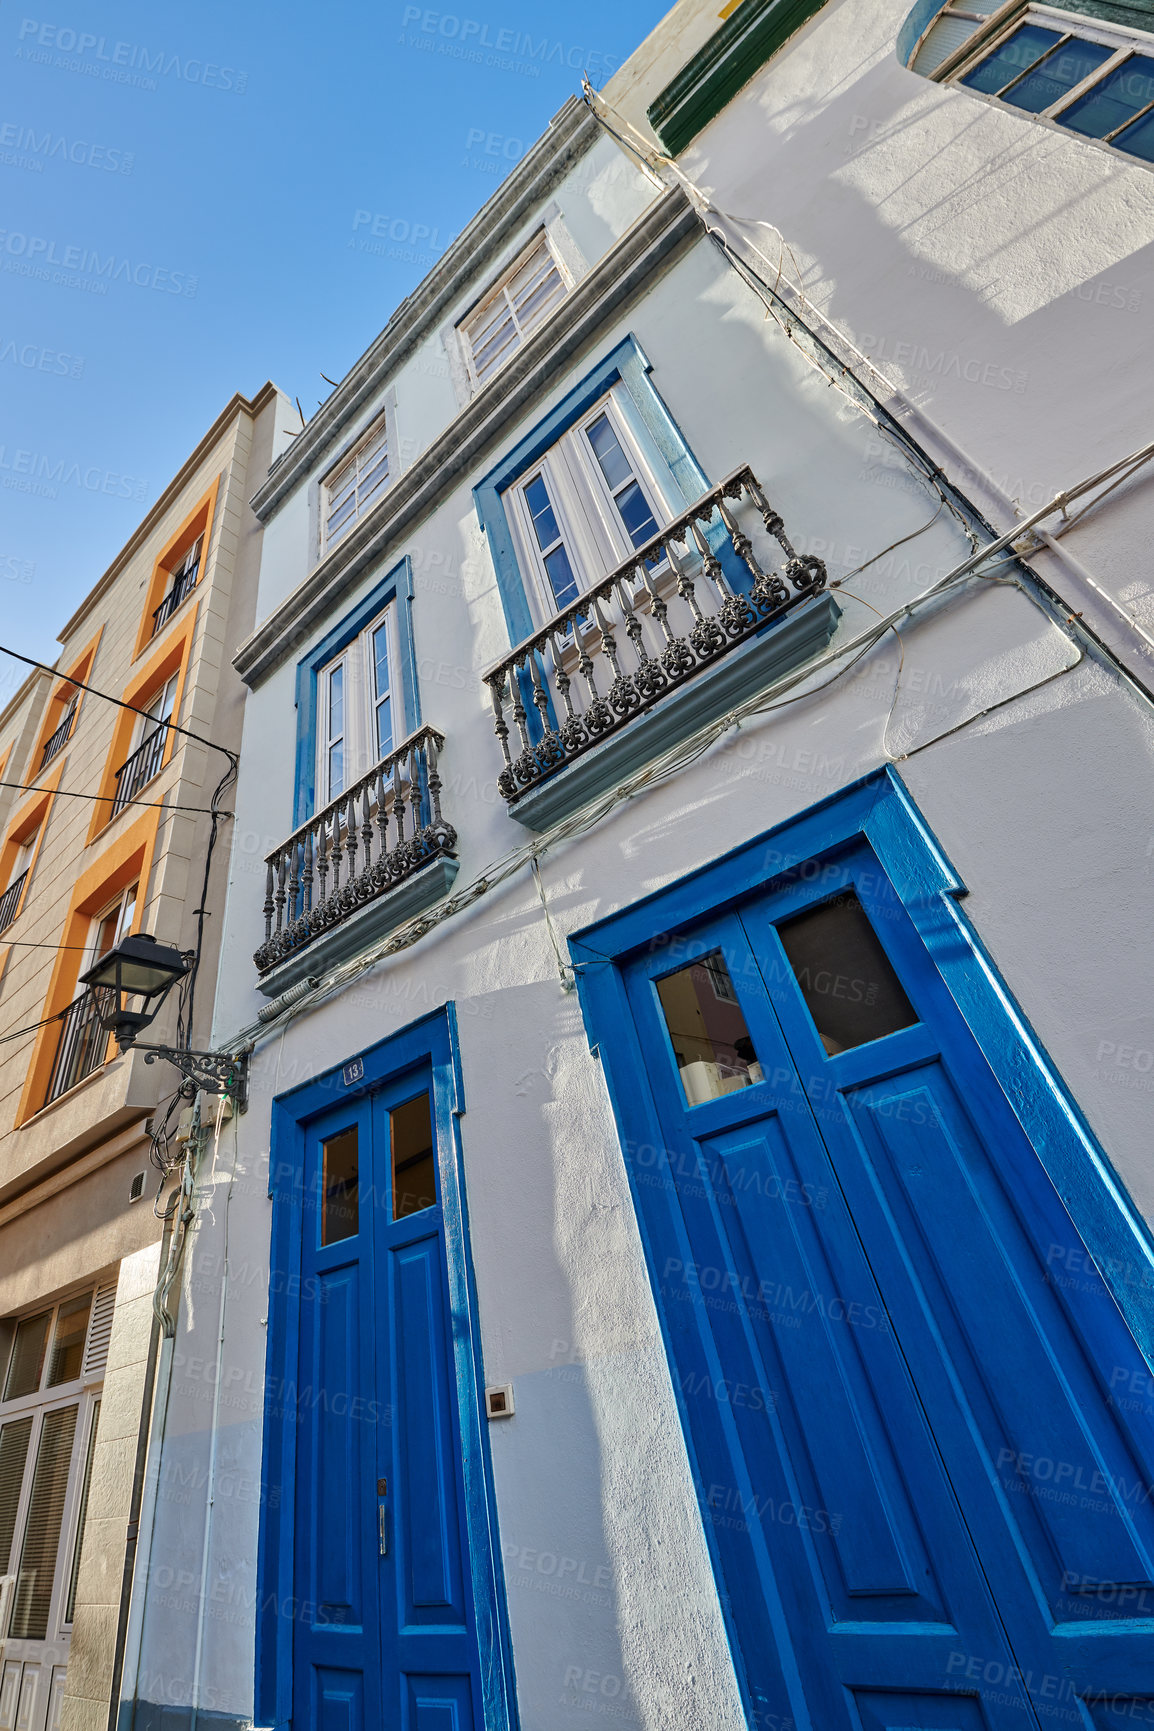 Buy stock photo Classic architecture of vibrant buildings with blue doors in a city. Low angle of ancient and traditional homes or houses in a small vintage town or village with bright colors and a unique design